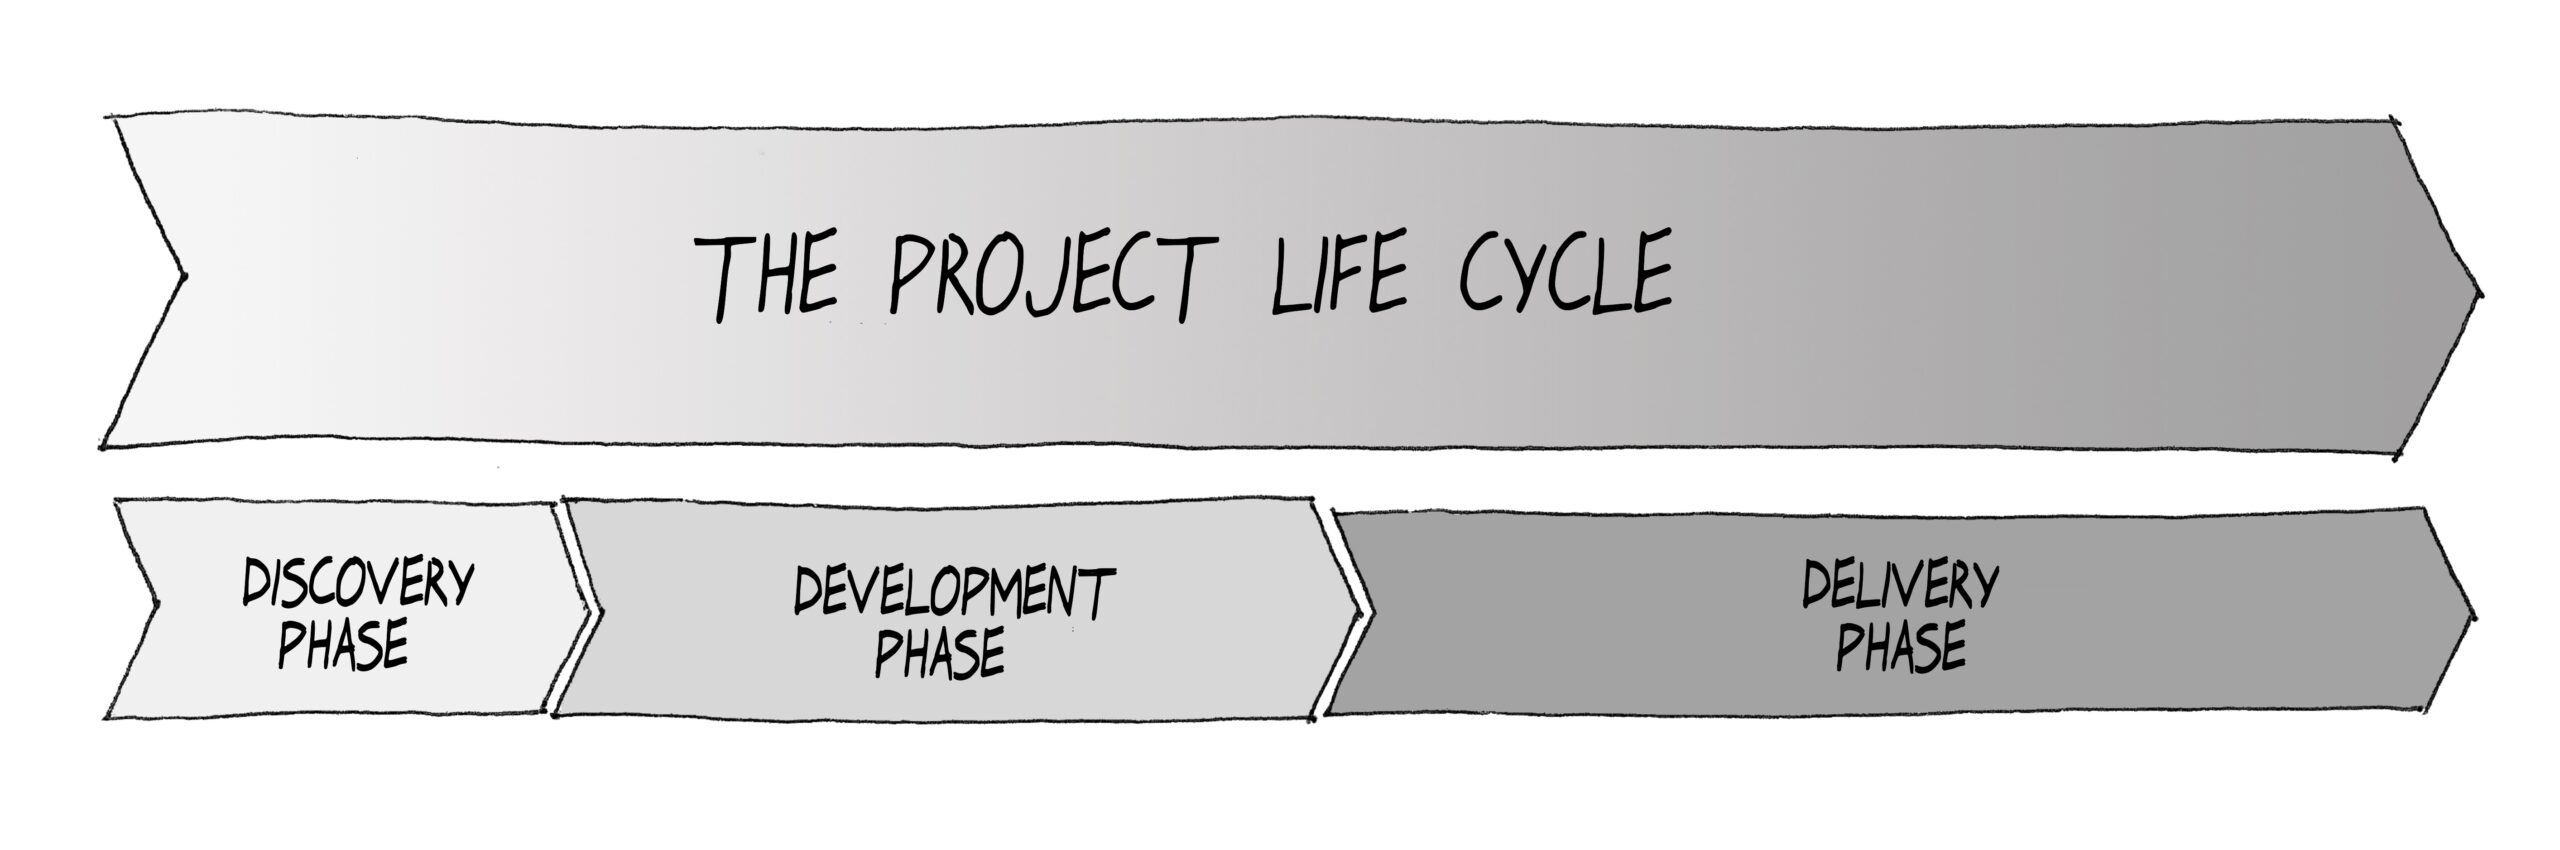 CAMMP™ project life cycle, with the three phases